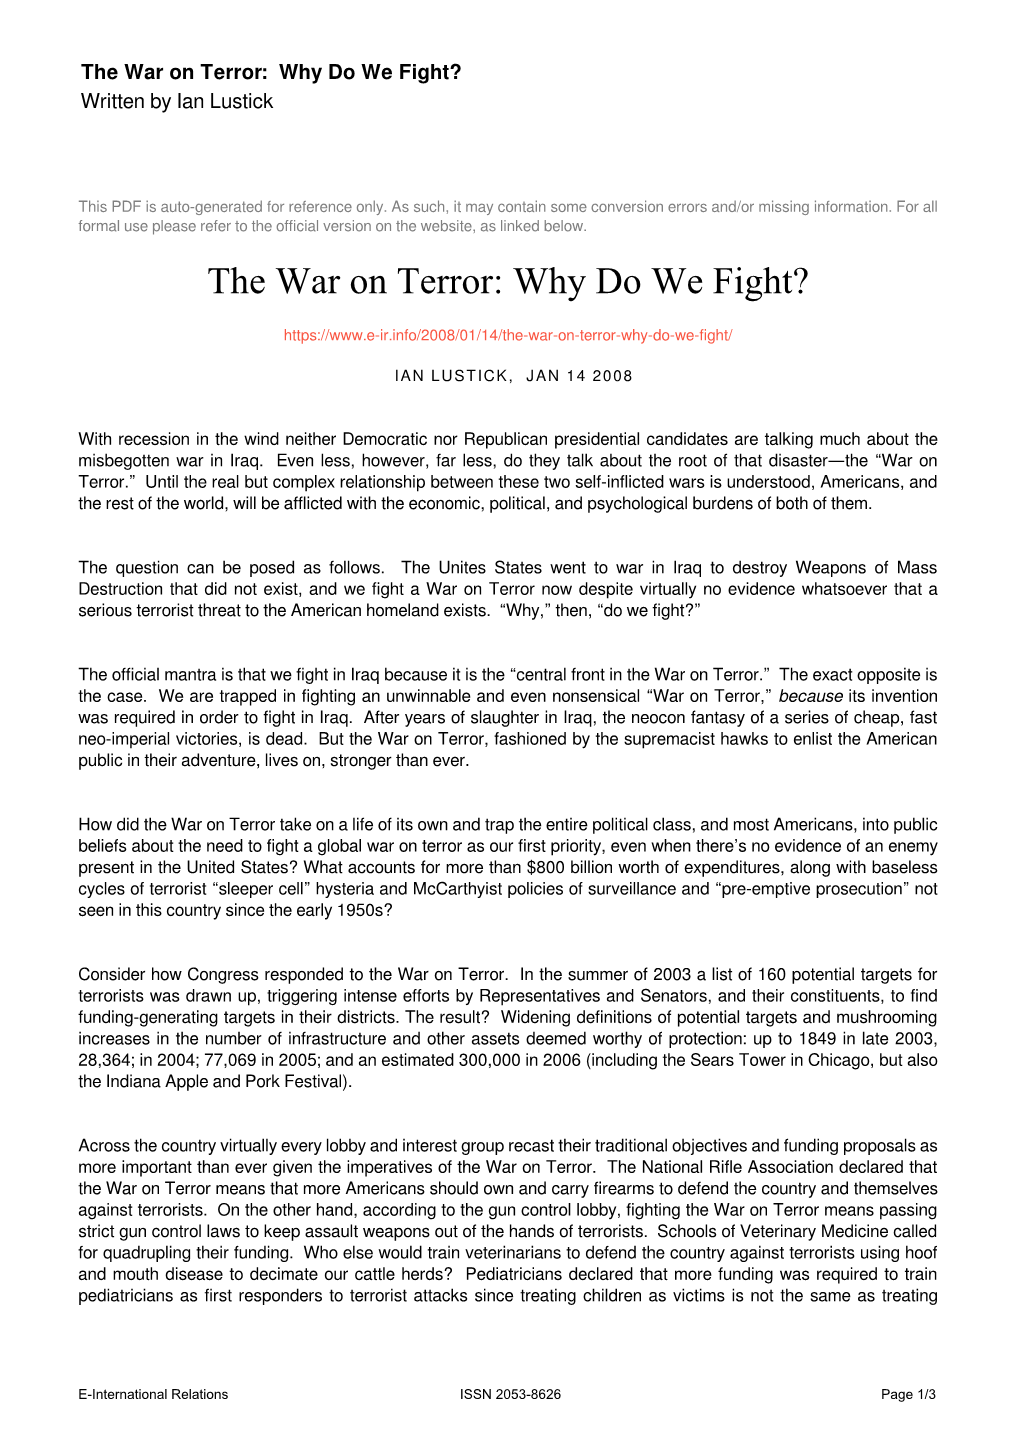 The War on Terror: Why Do We Fight? Written by Ian Lustick